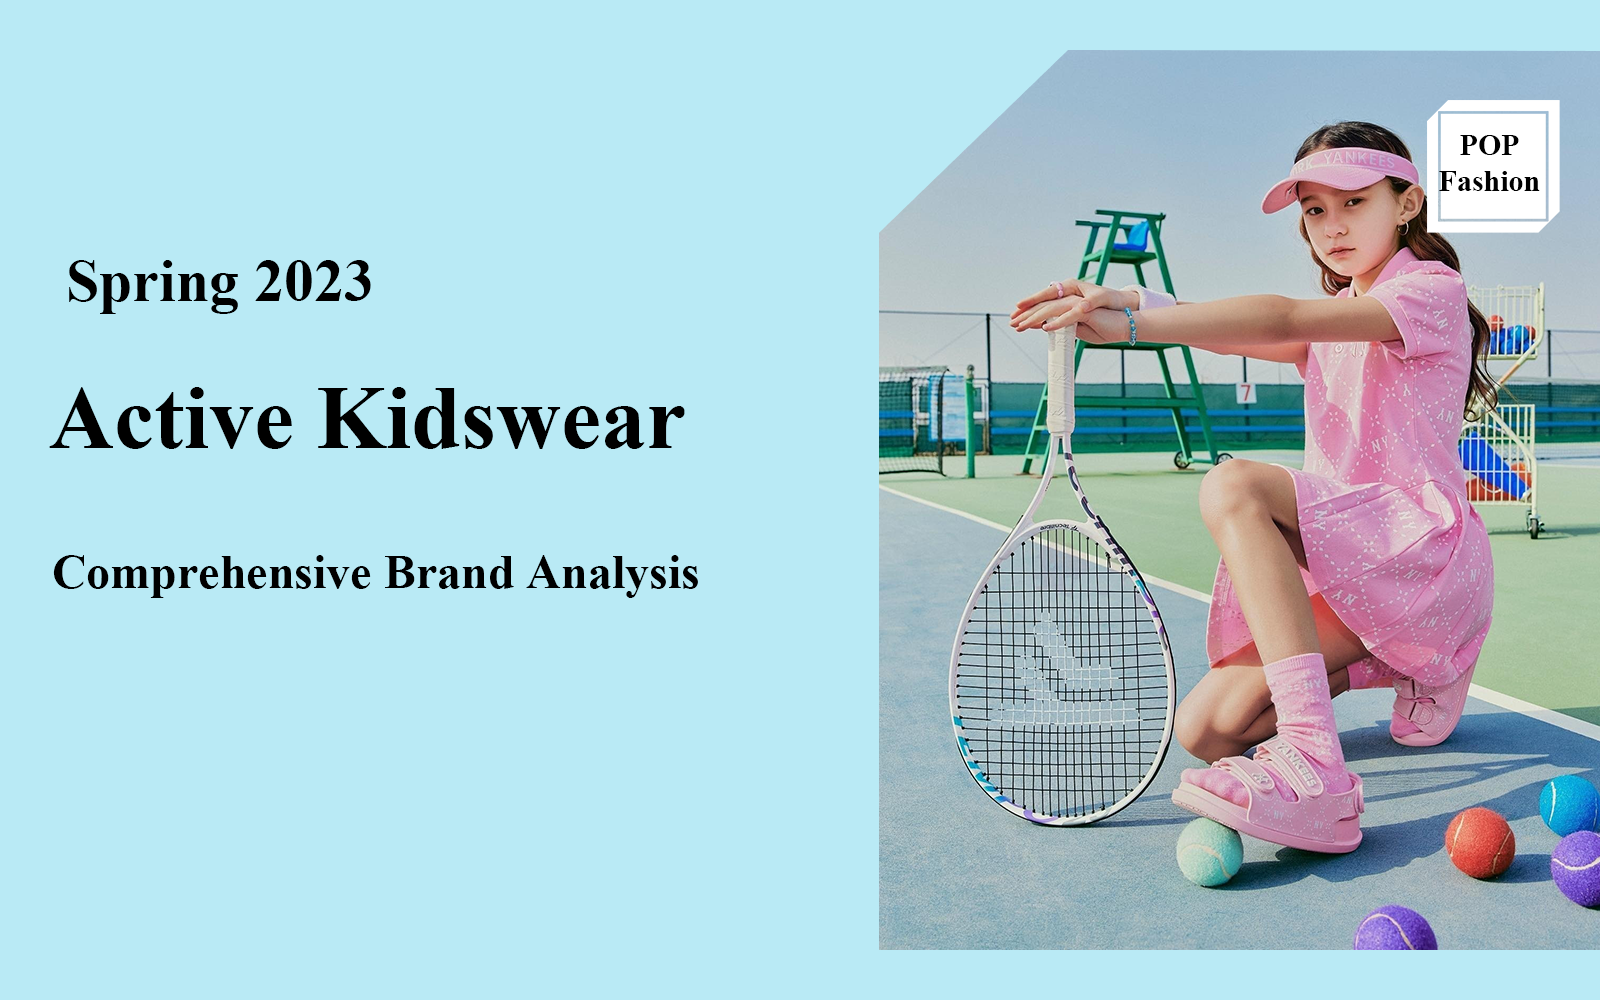 The Comprehensive Brand Analysis of Active Kidswear